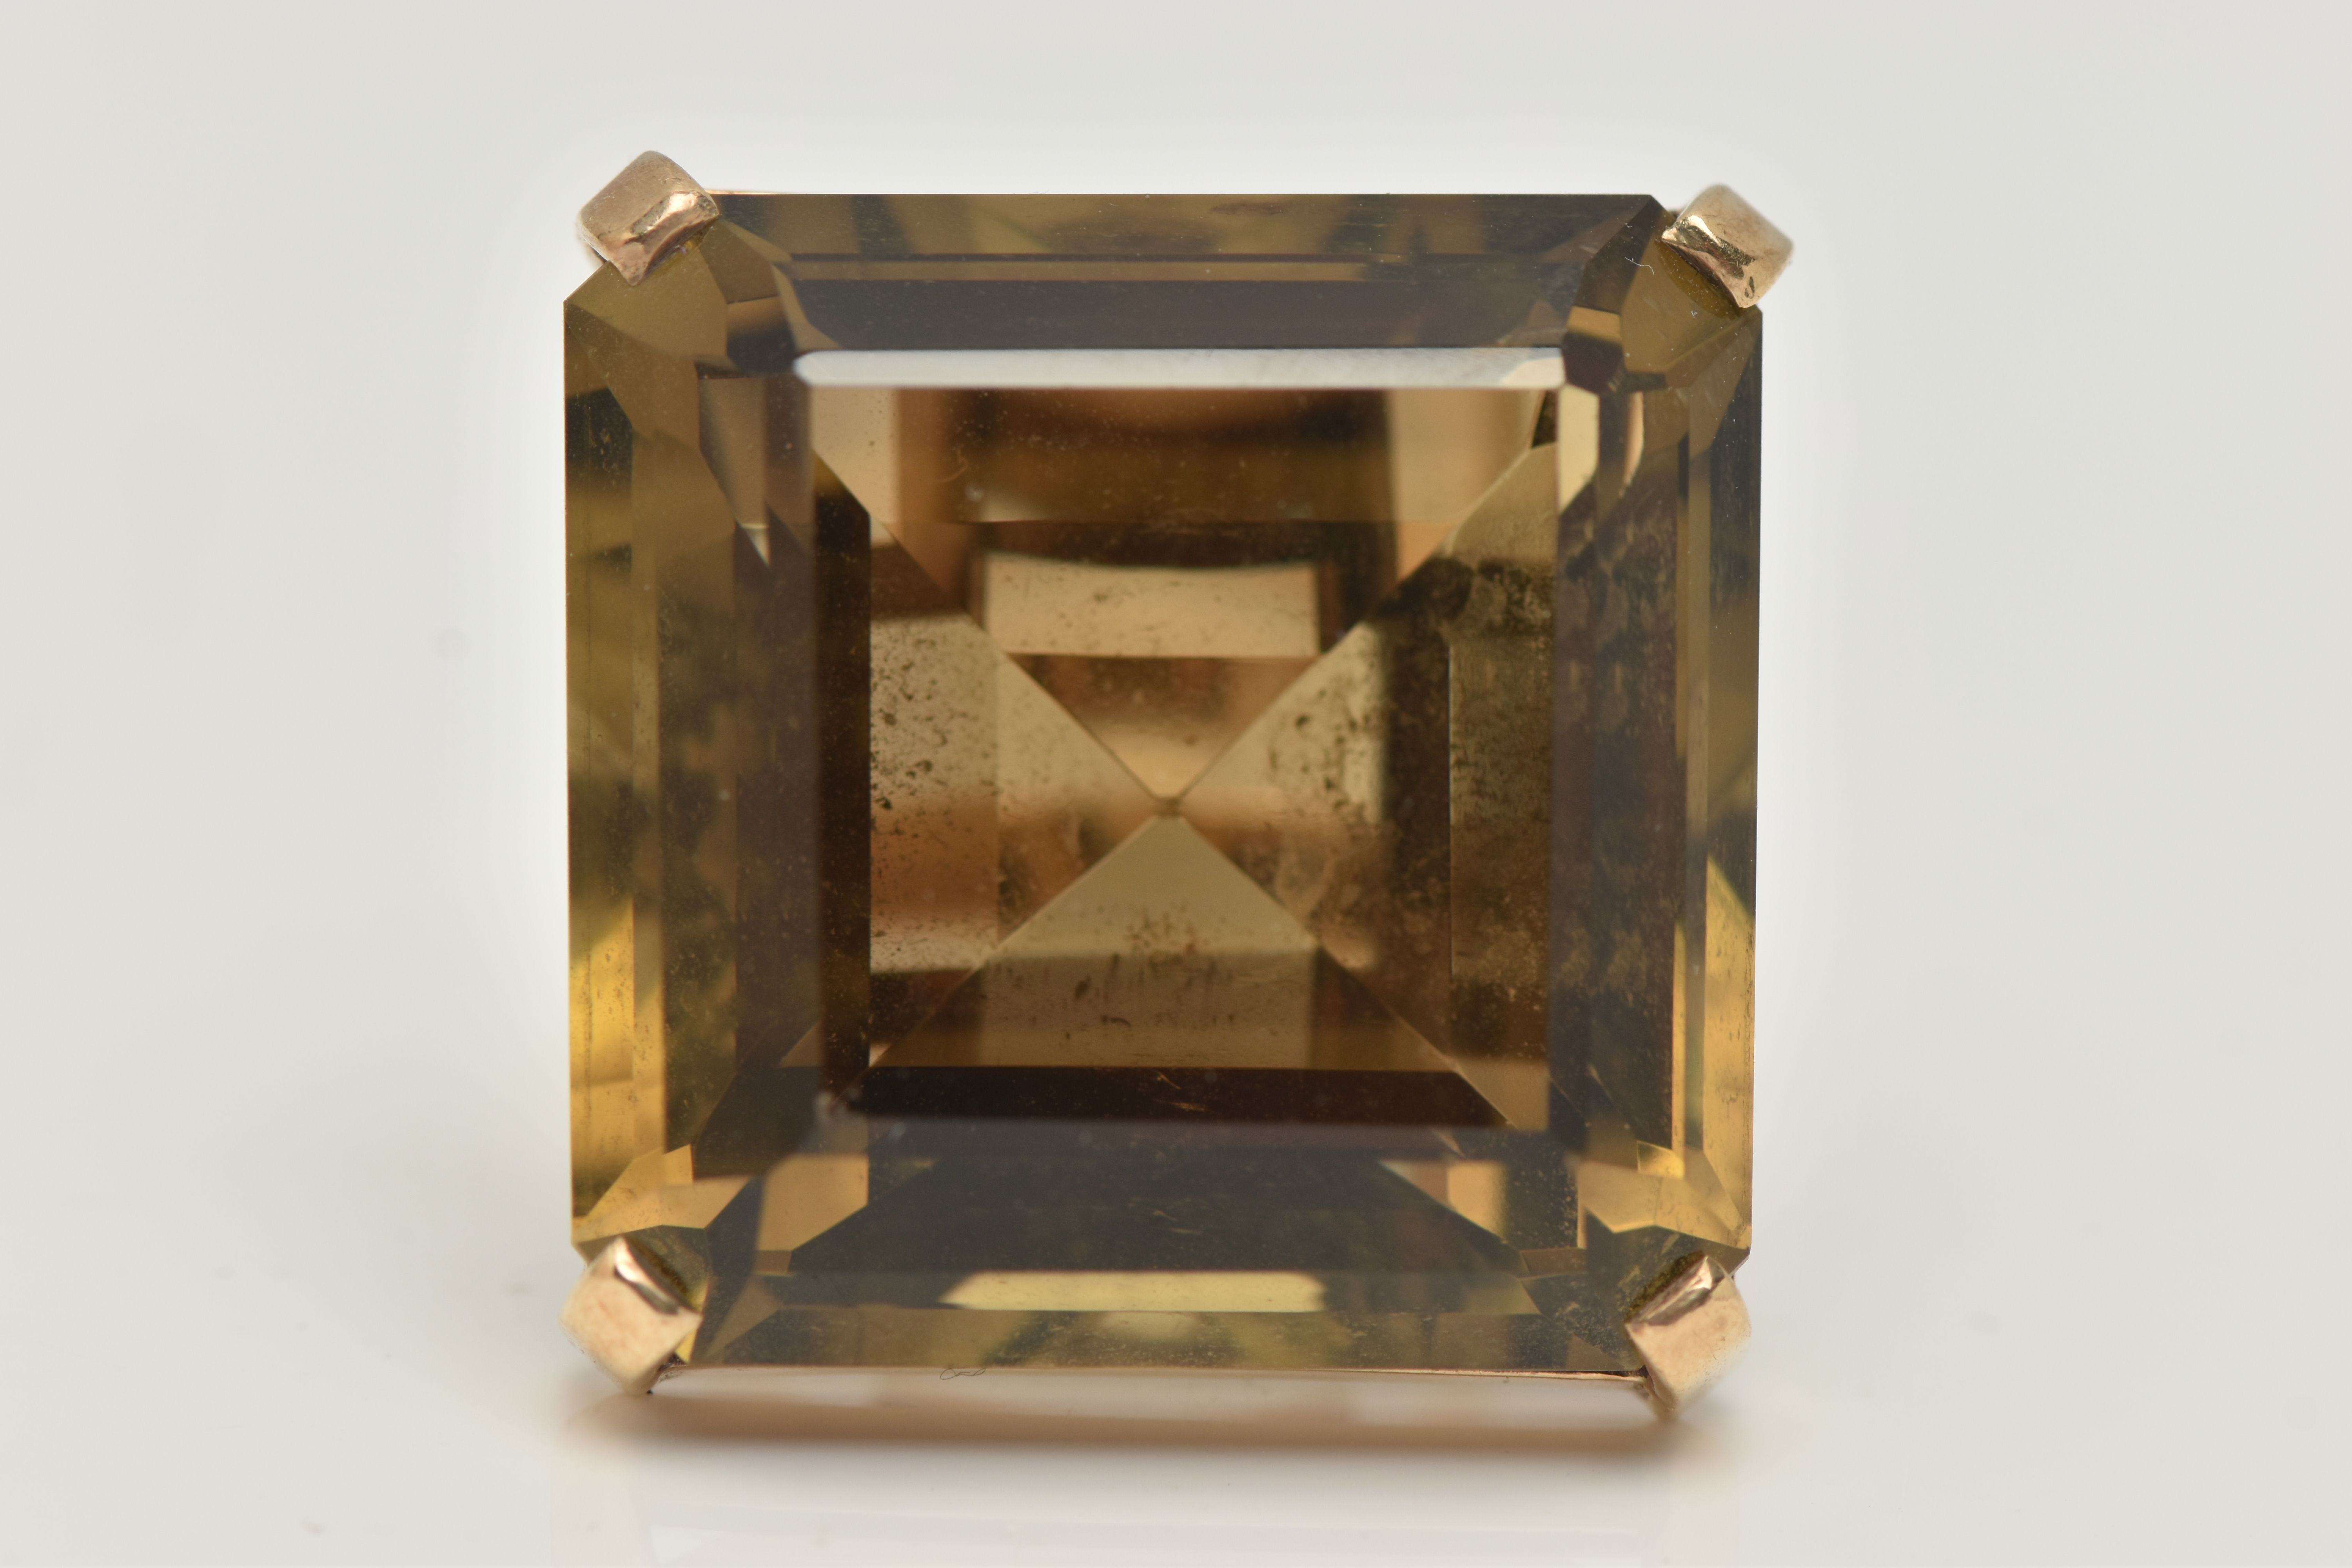 A 9CT GOLD SMOKY QUARTZ RING, designed as a large square smoky quartz within a four claw setting, - Image 5 of 5